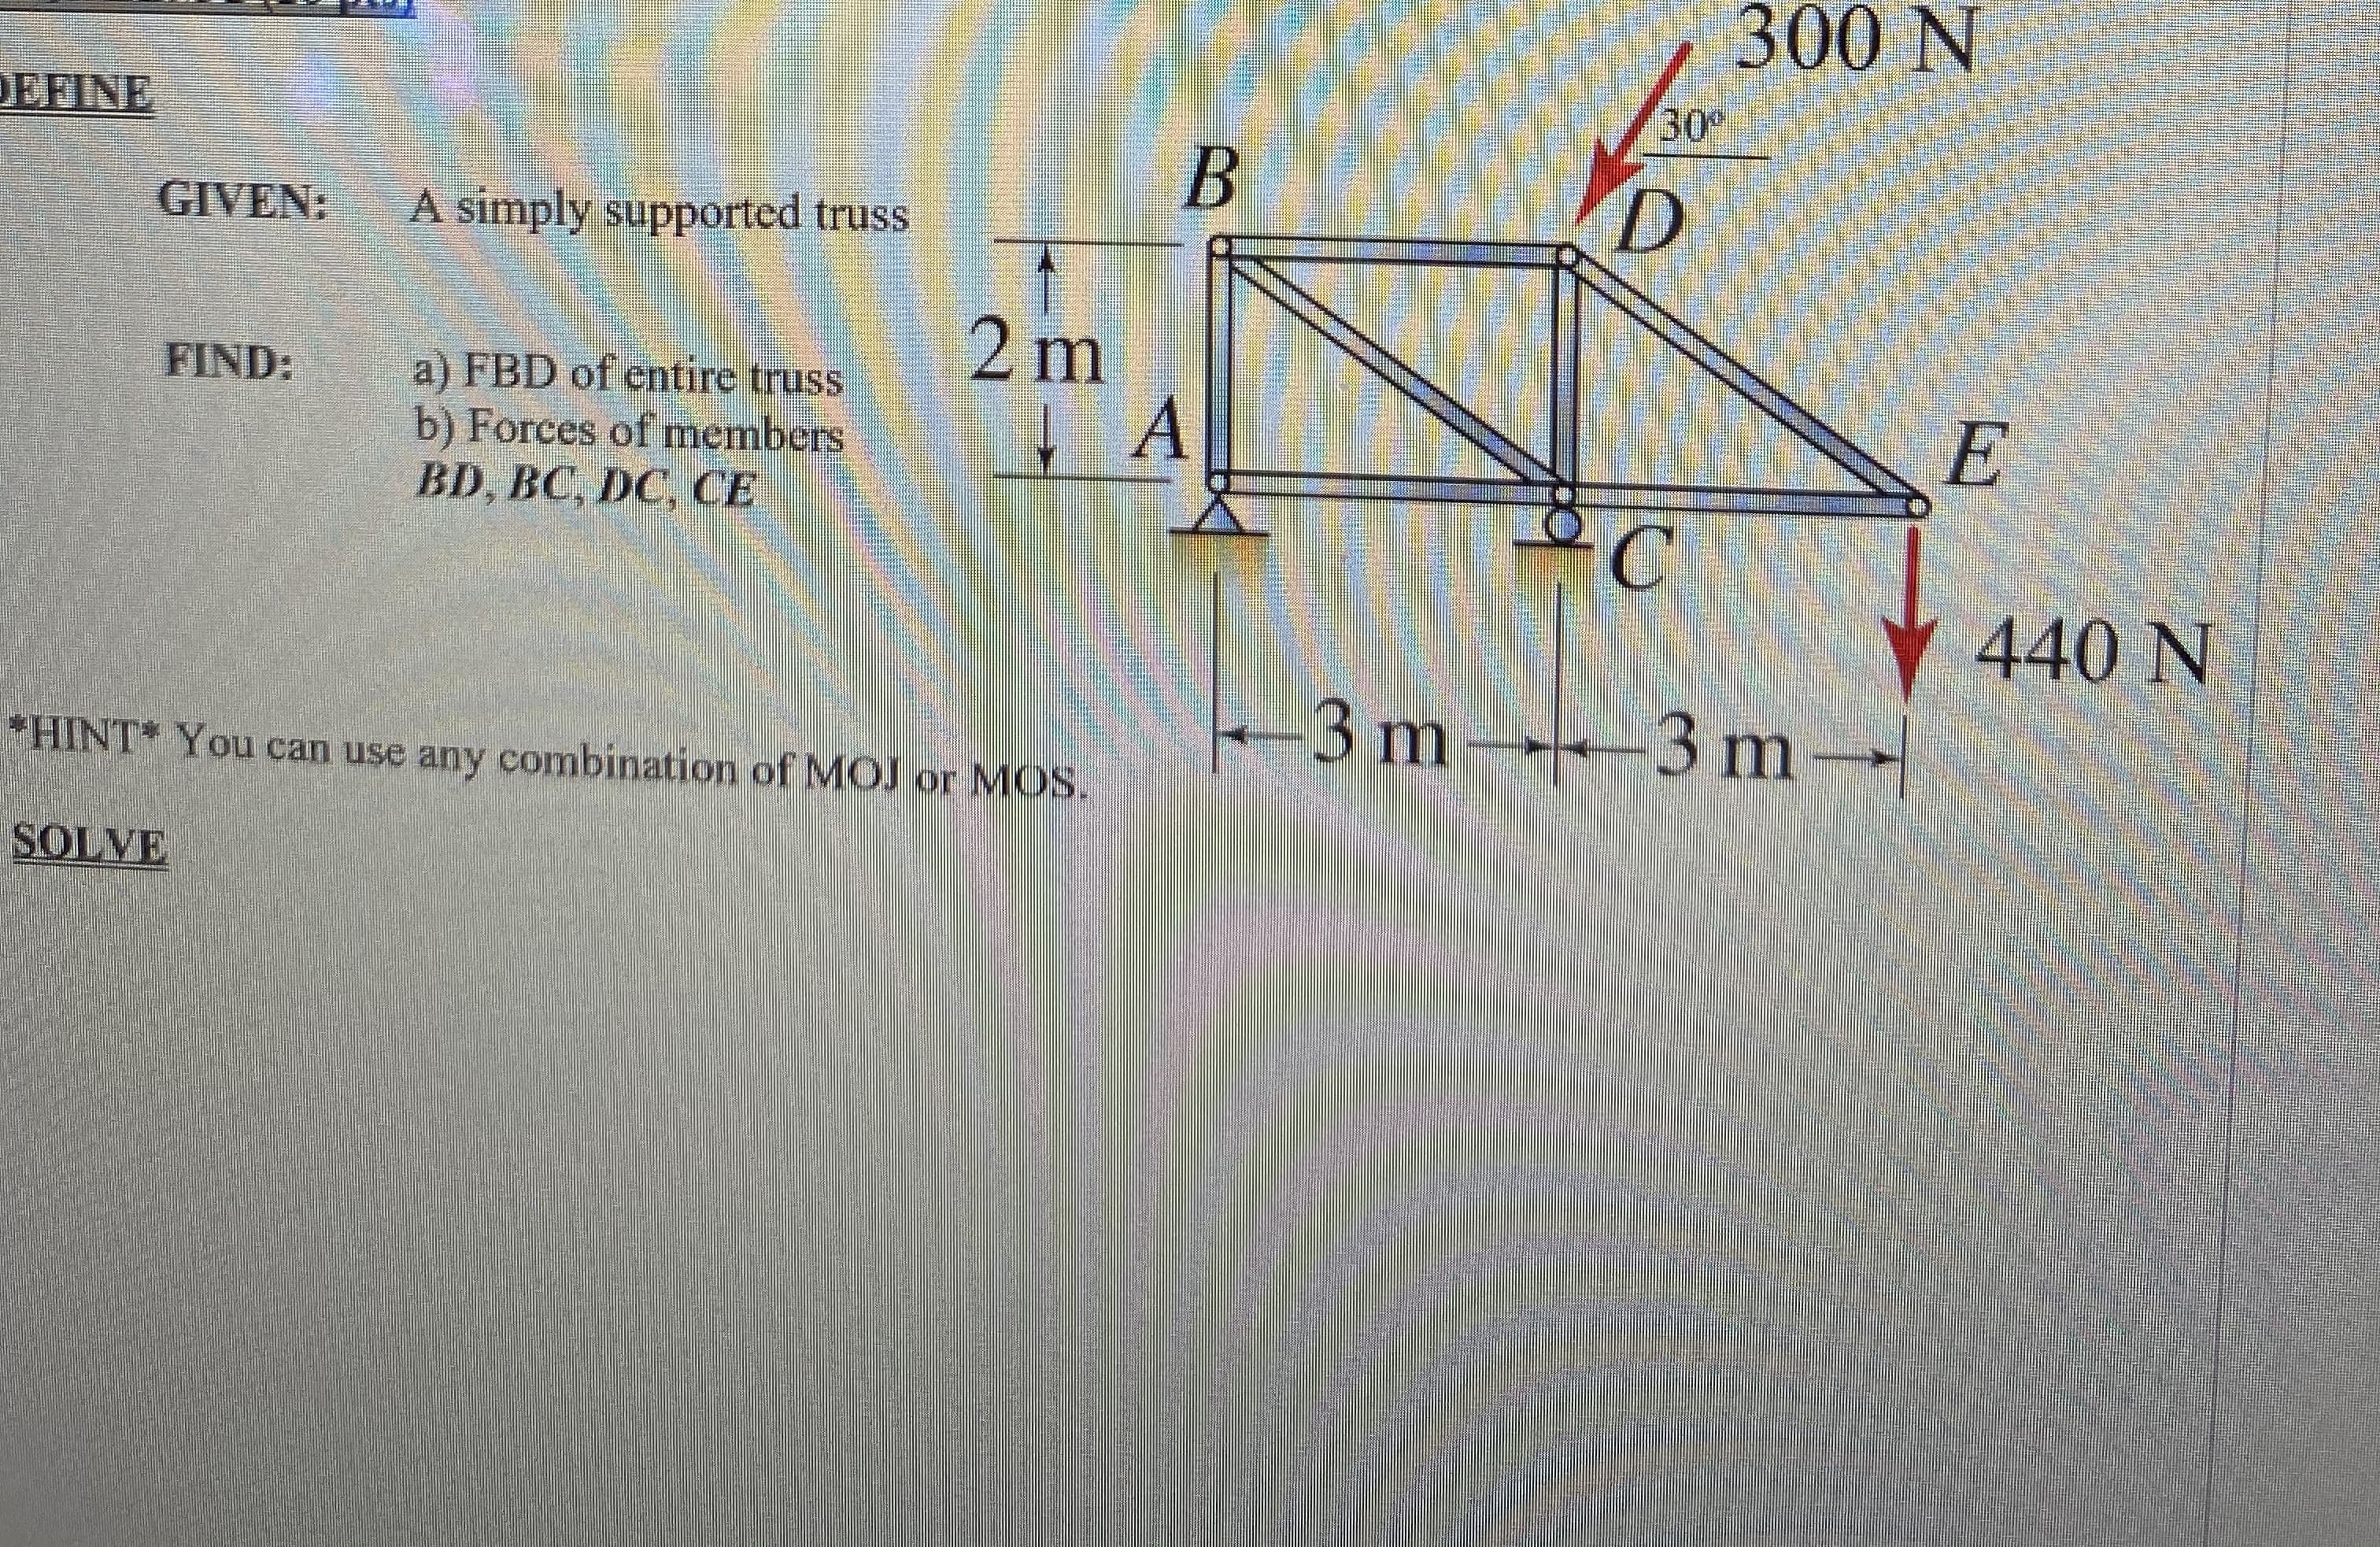 A simply supported truss
a) FBD of entire truss
b) Forces of members
BD, BC, DC, CЕ
